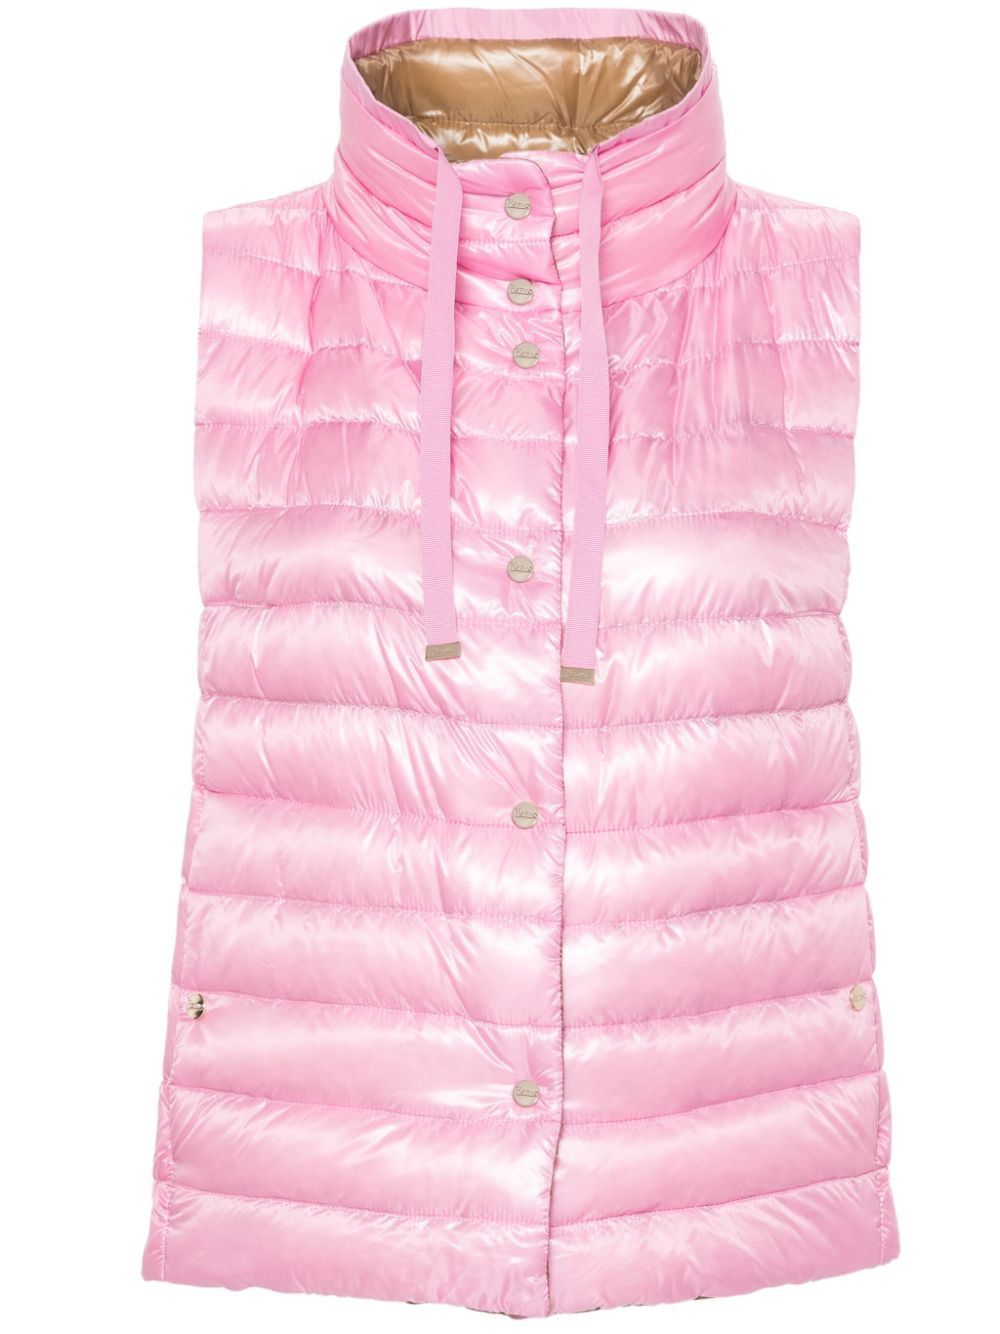 Stylish SS24 Women's Herno Vest in 4021 Color